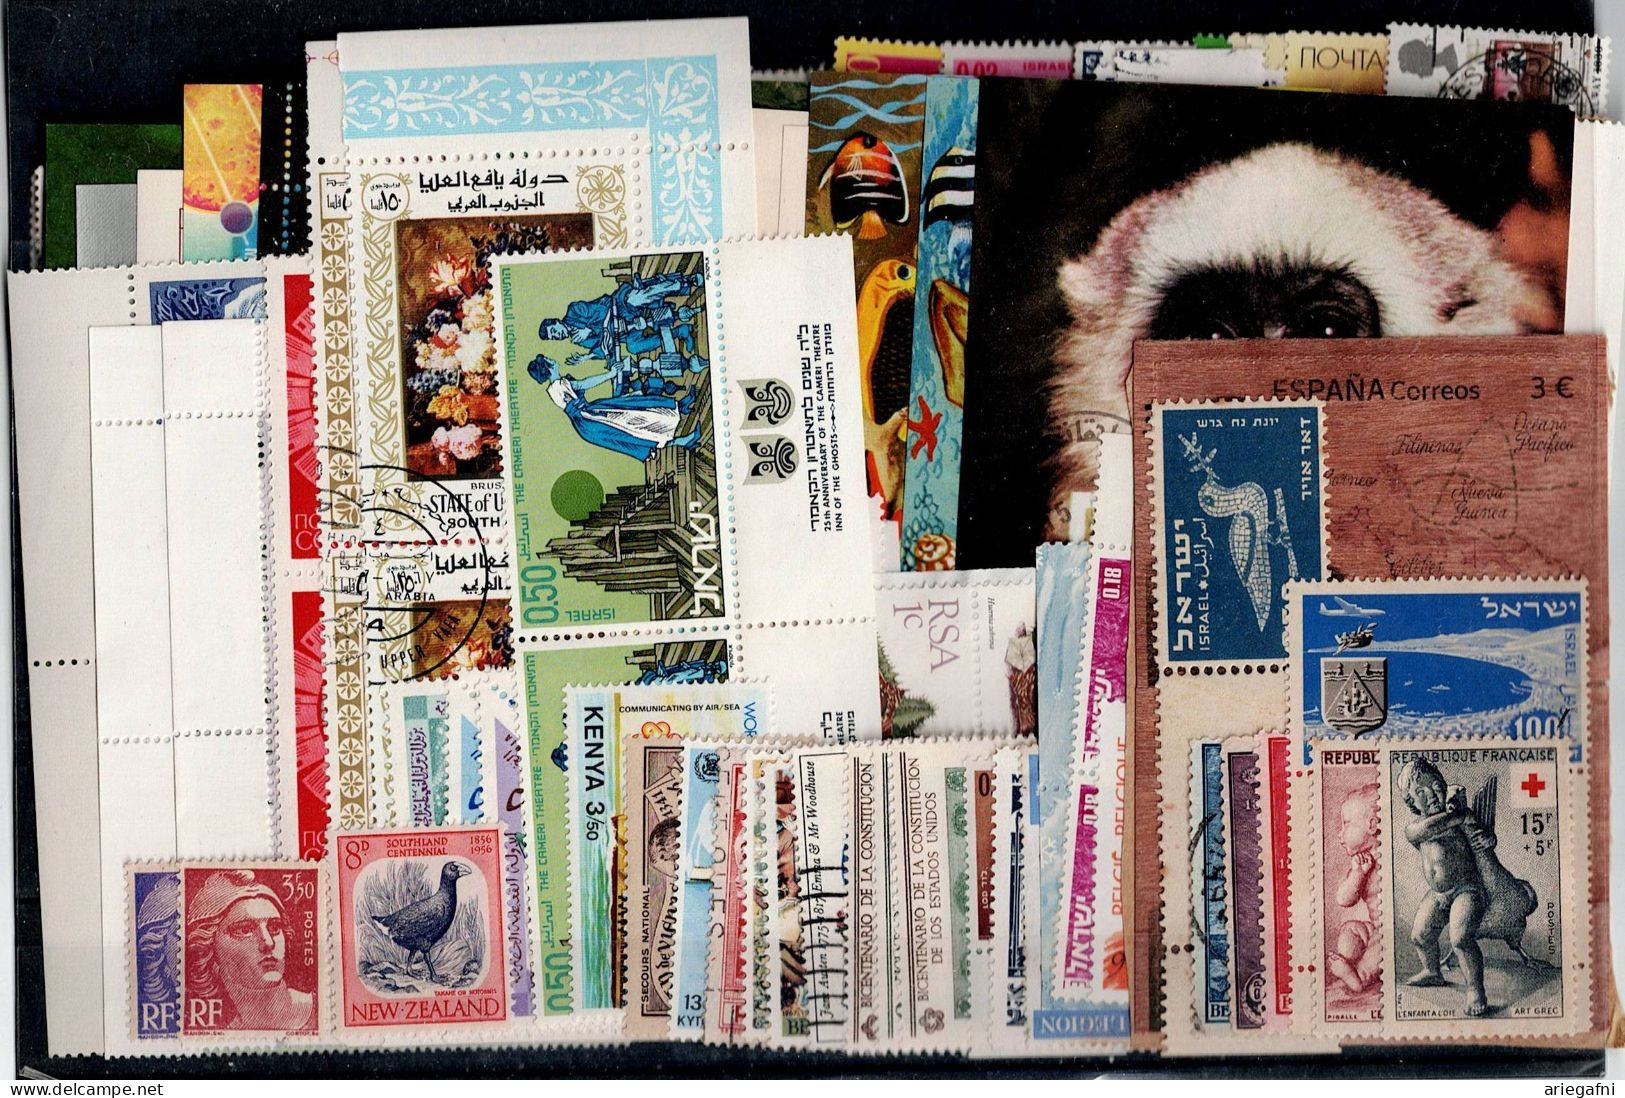 LOT OF 252 STAMPS MINT+USED+ 16 BLOCKS MI- 90 EURO VF!! - Collections (sans Albums)